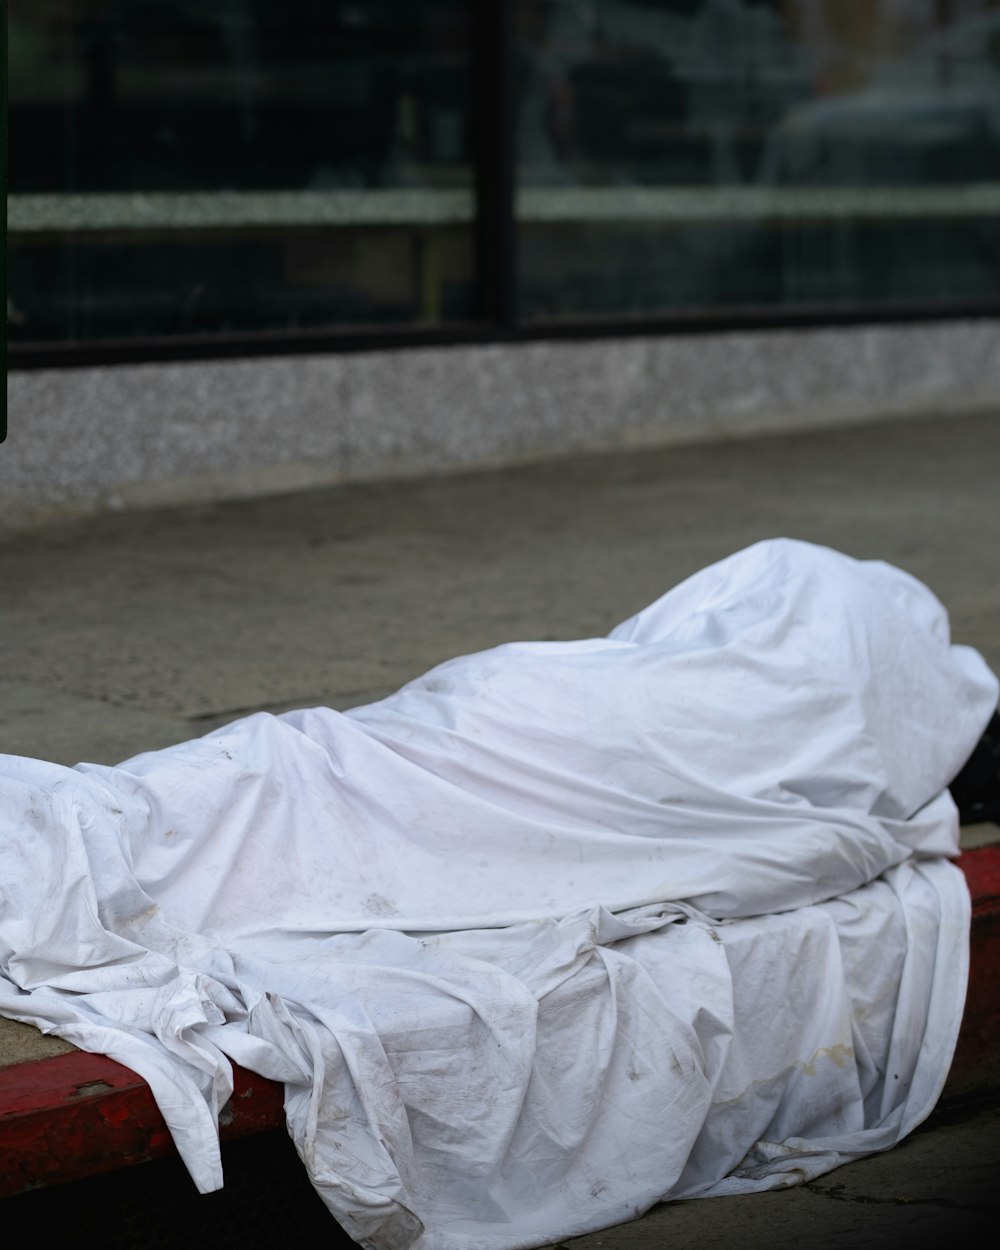 a white sheet is covering a man's body on a red bench